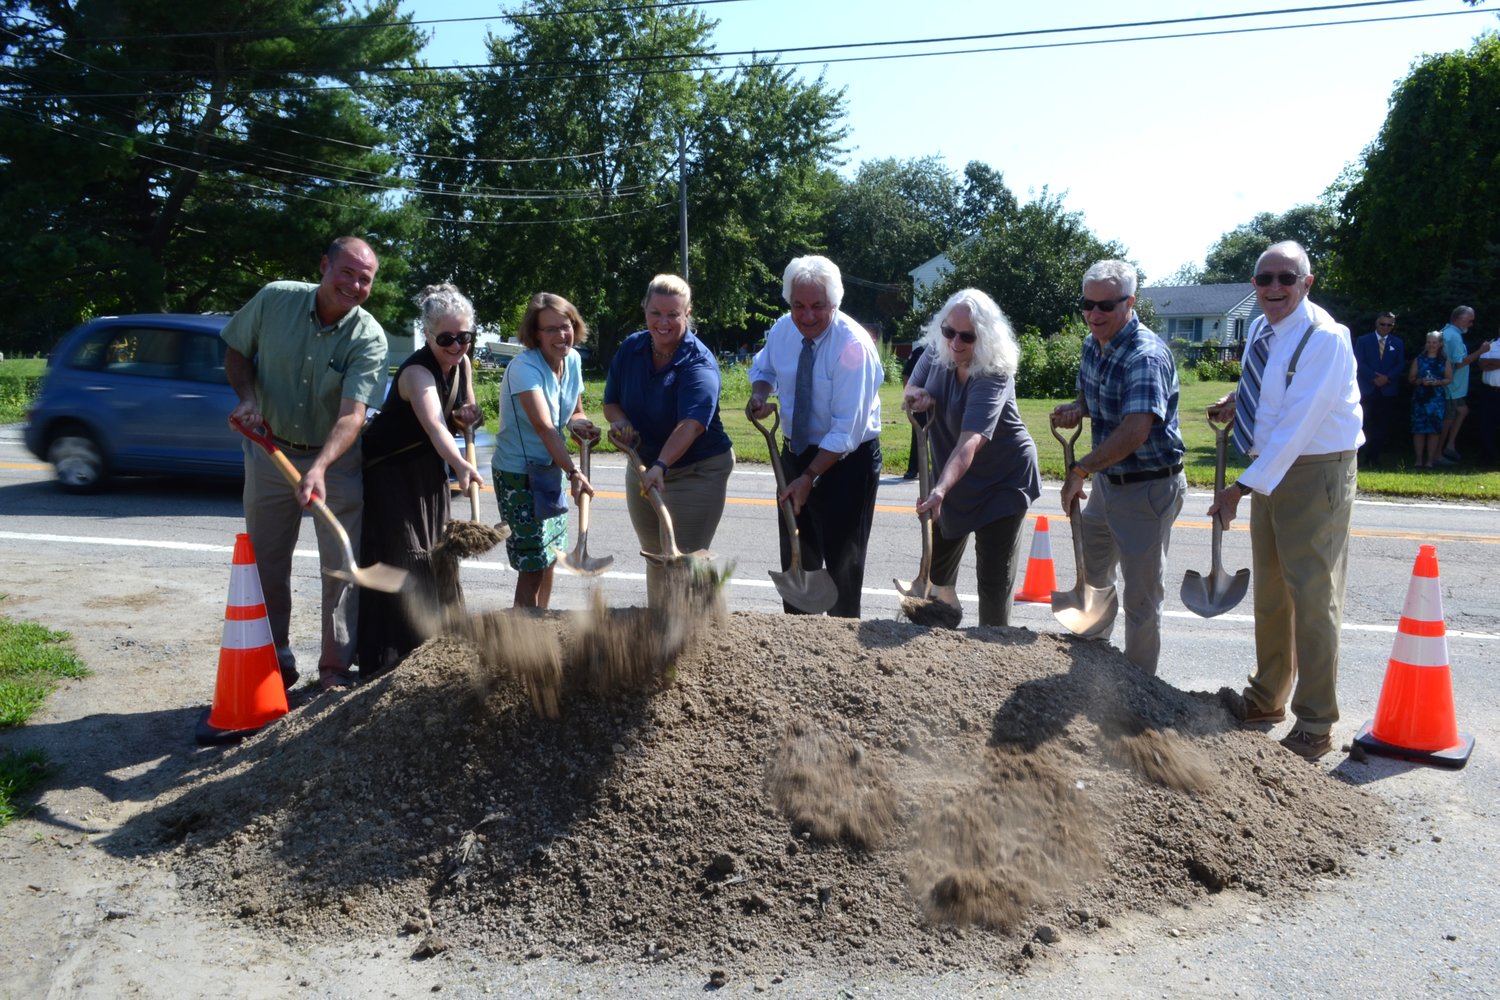 Steven Coutu, Director of the Bristol County Water Authority; Keri Cronin, Warren Town Council President; Wenley Ferguson, Director of Habitat Restoration for Save the Bay; Kate Michaud, Warren Town Manager; Peter Alviti, Director of the Rhode Island Department of Transportation; Rep. June Speakman; Rep. Jason Knight; and Allan Klepper, former Chairman of the BCWA, ceremoniously broke ground on the project last Wednesday morning.